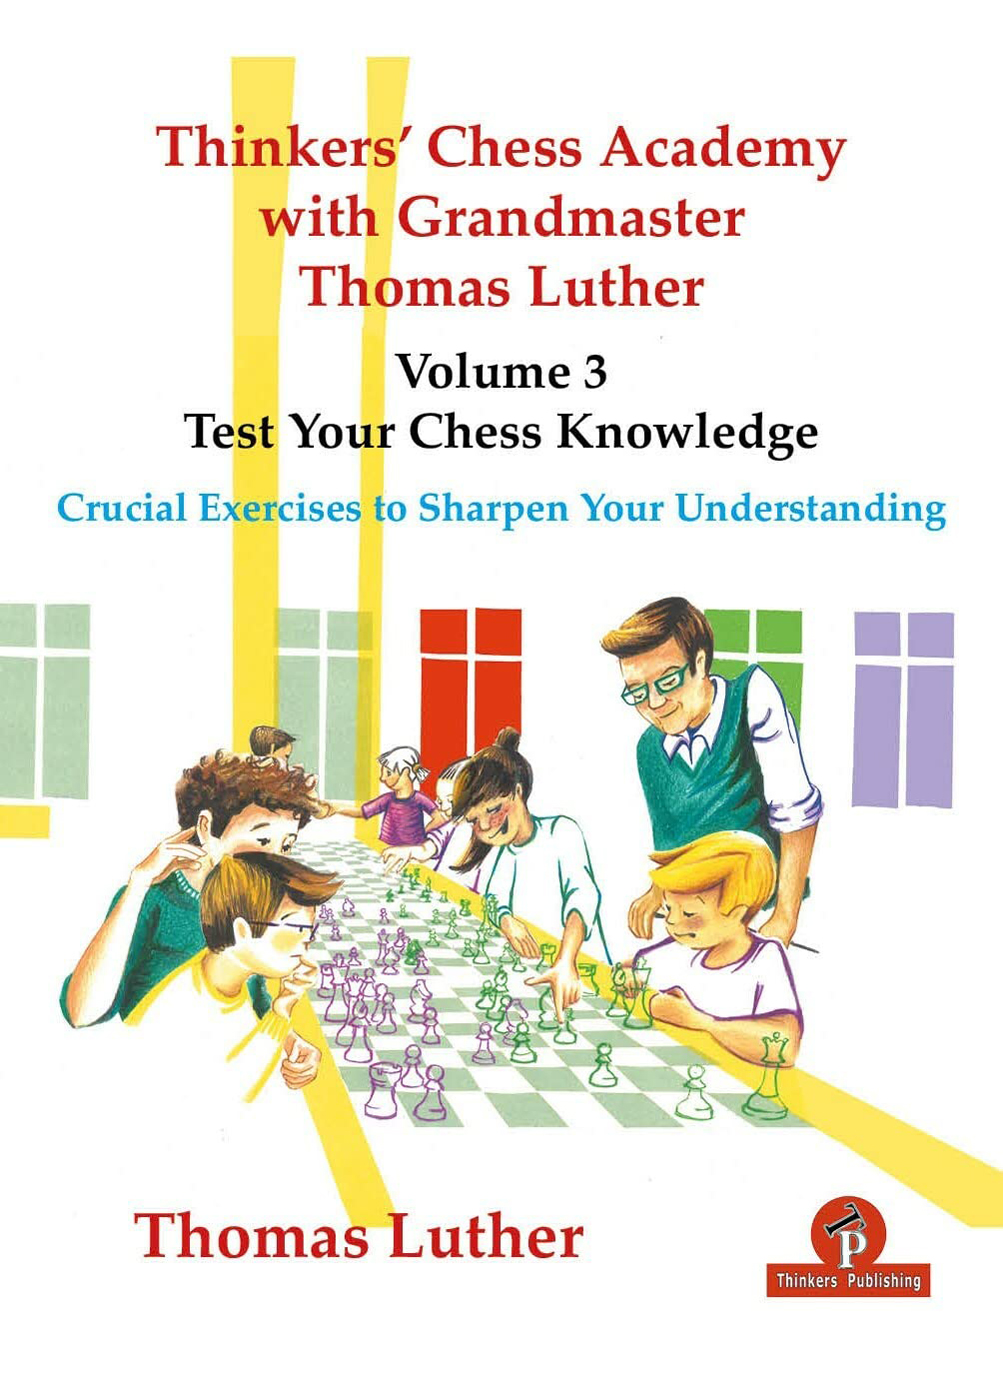 Thinkers' Chess Academy with Grandmaster Thomas Luther Vol. 3